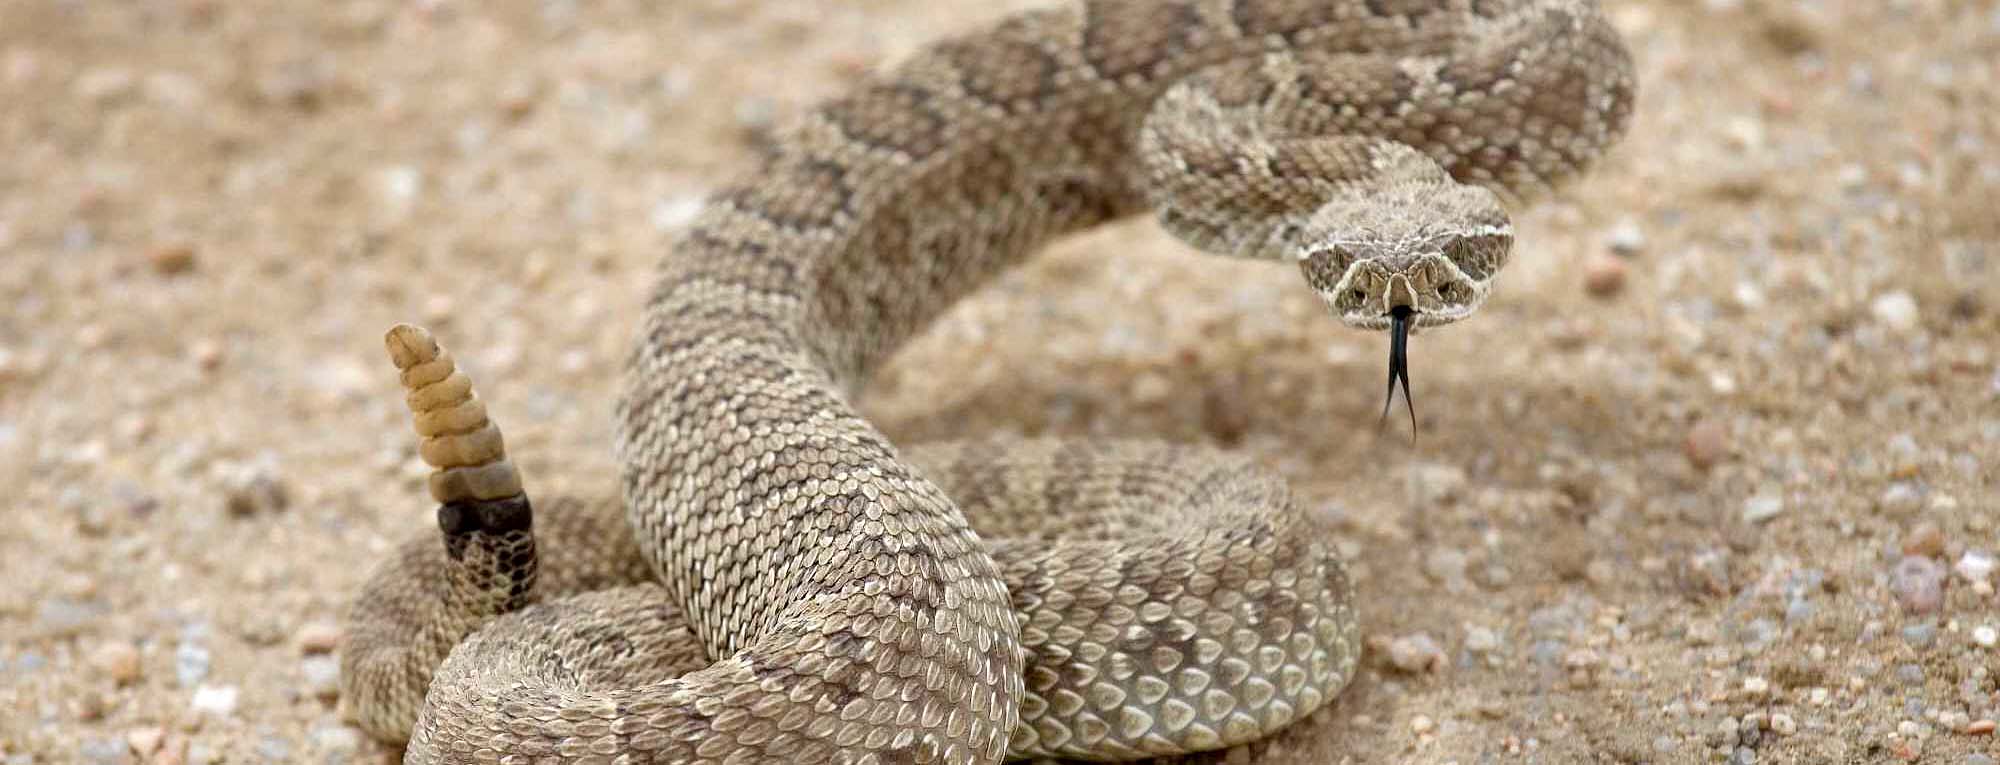 can you survive a rattlesnake bite